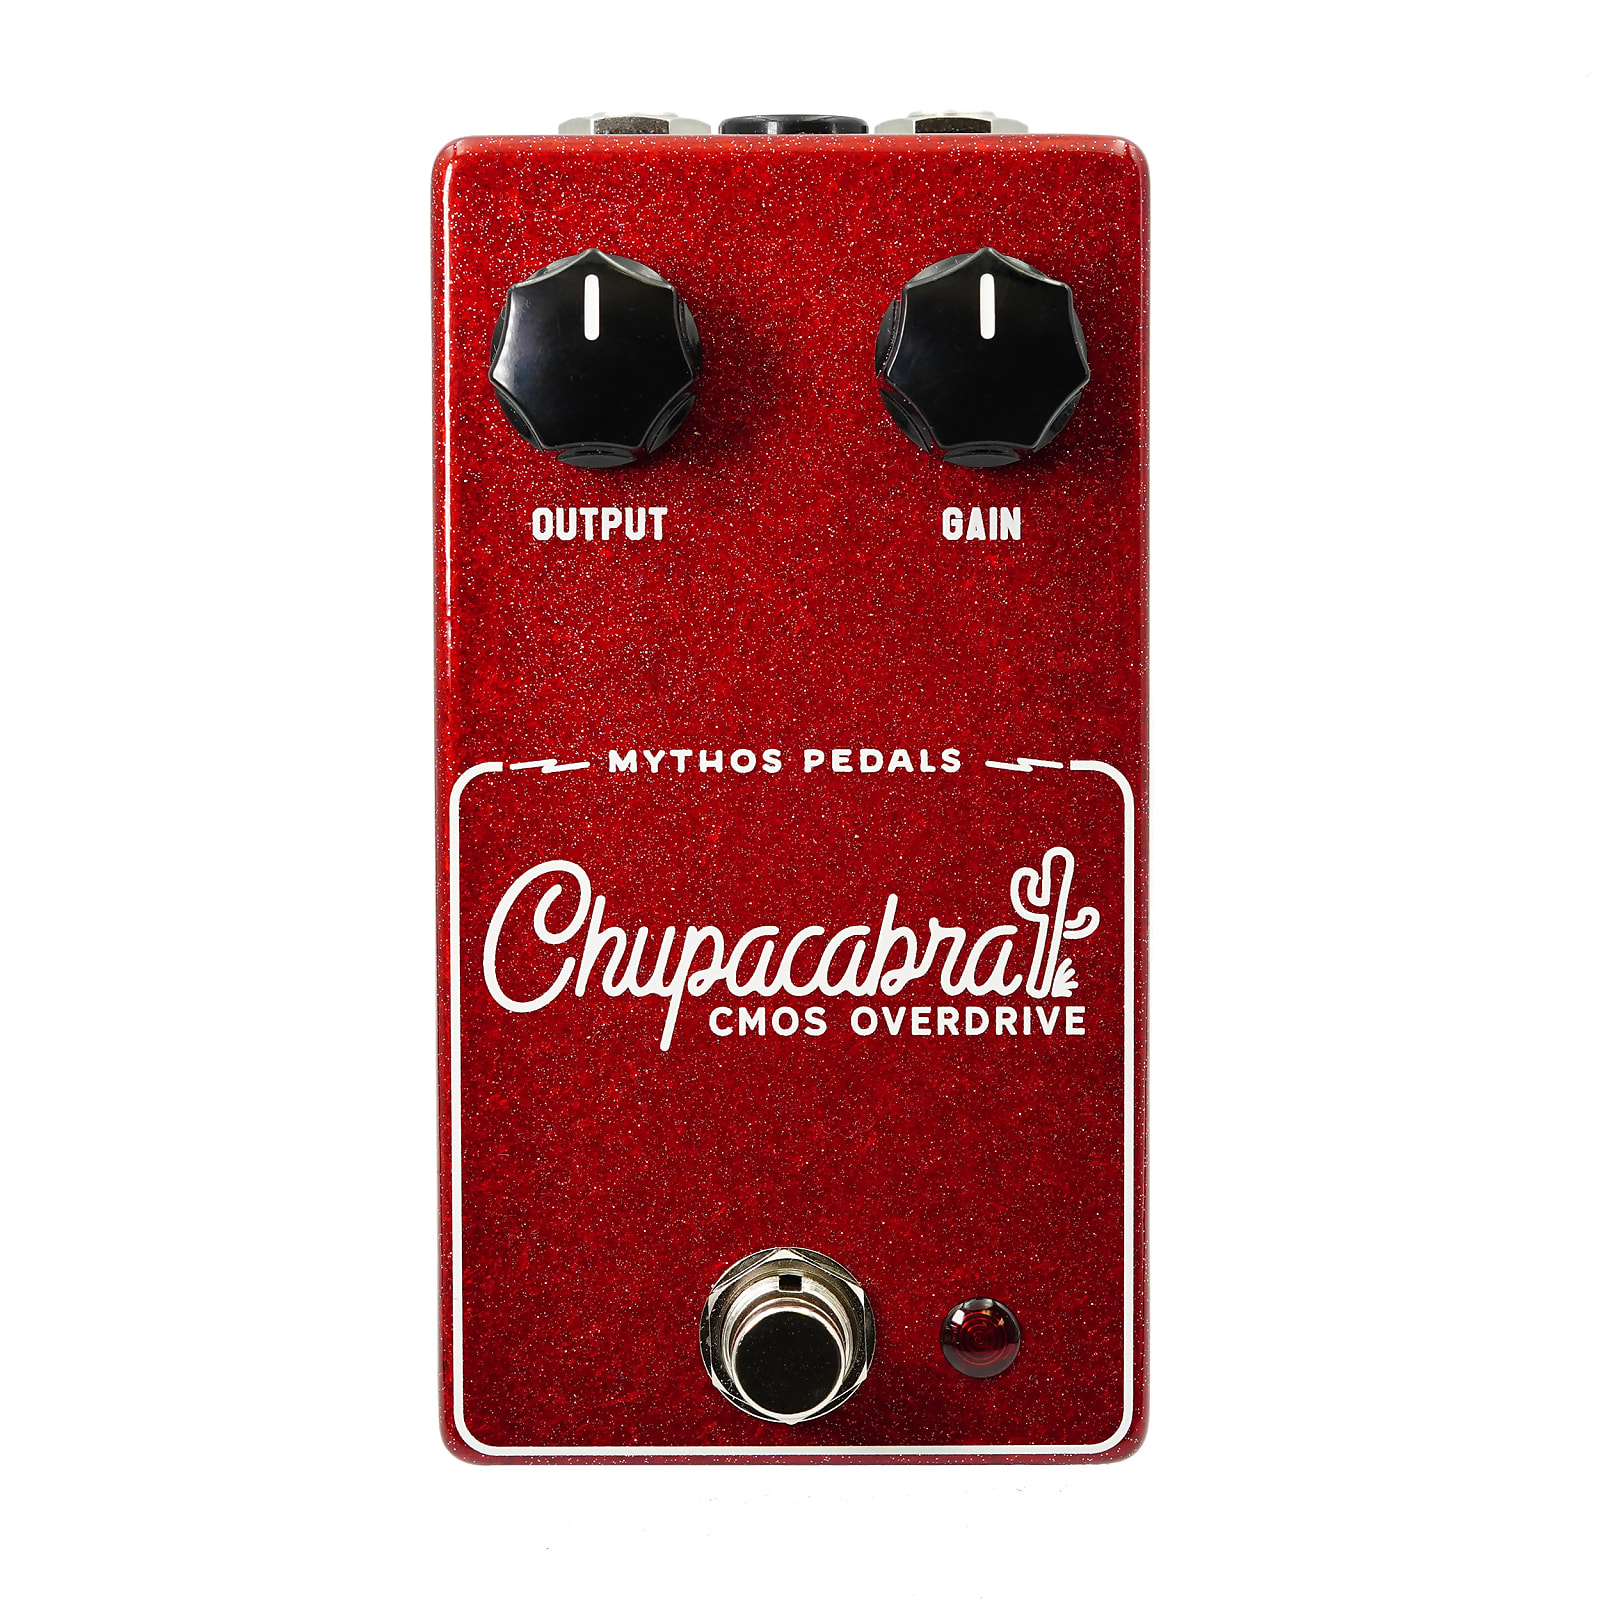 Mythos Pedals Chupacabra Overdrive Effects Pedal